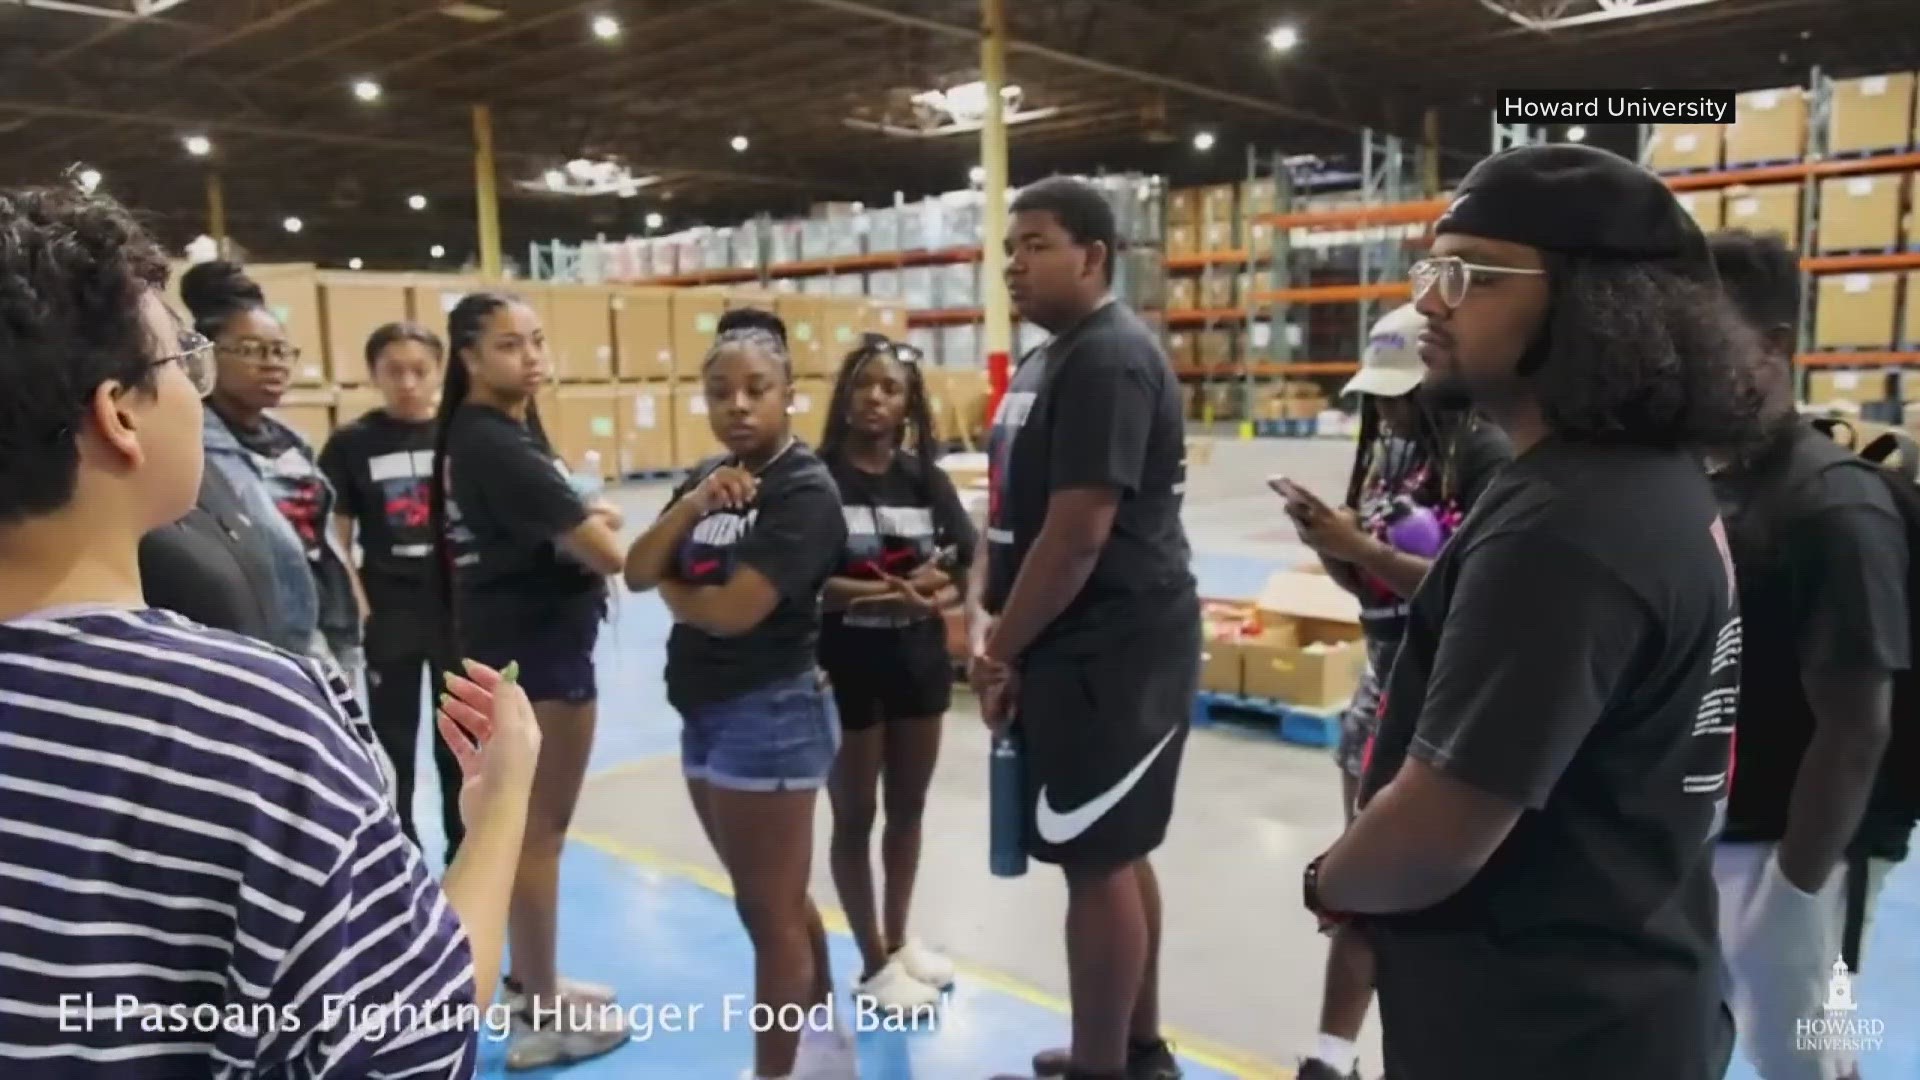 Howard University students are serving others with a longstanding tradition.